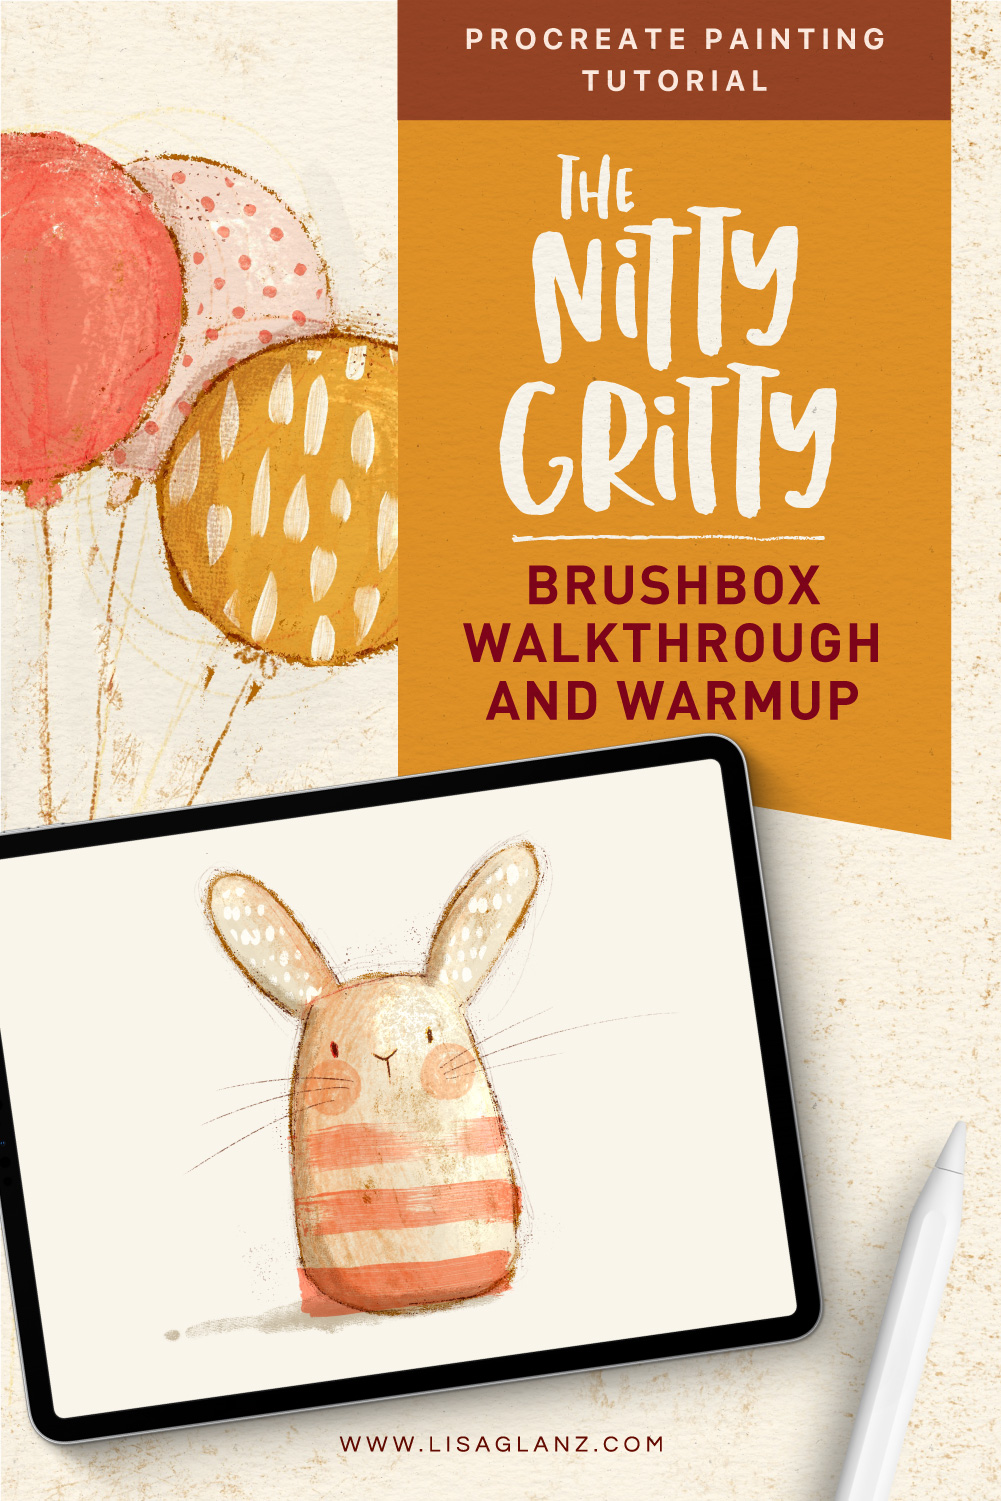 Add effortless texture in Procreate with The Nitty Gritty Brushbox